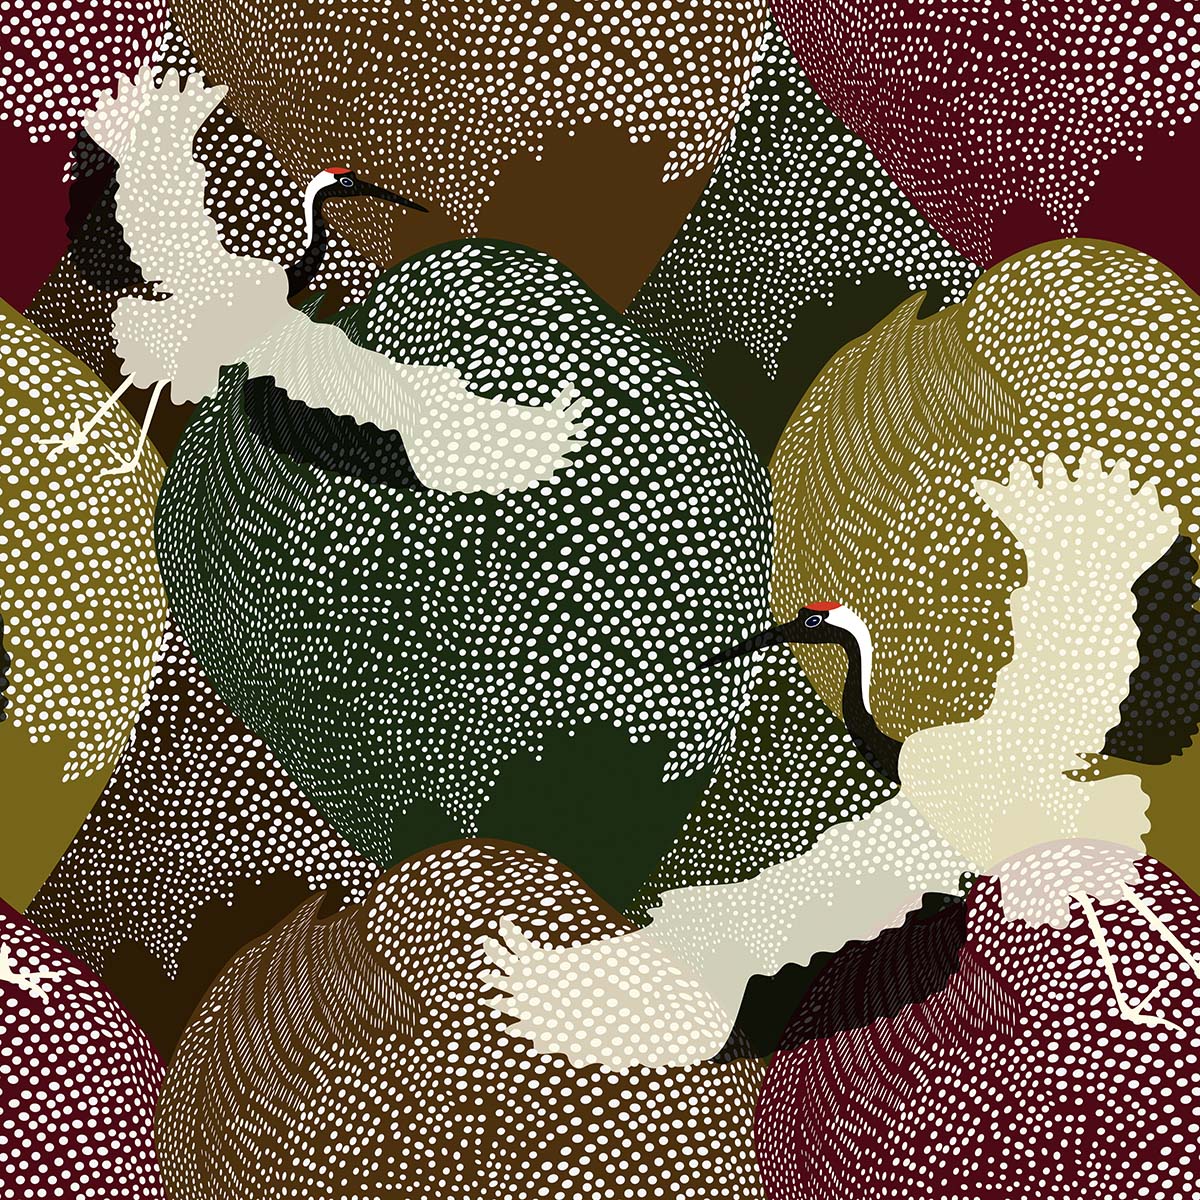 A pattern of birds with white dots